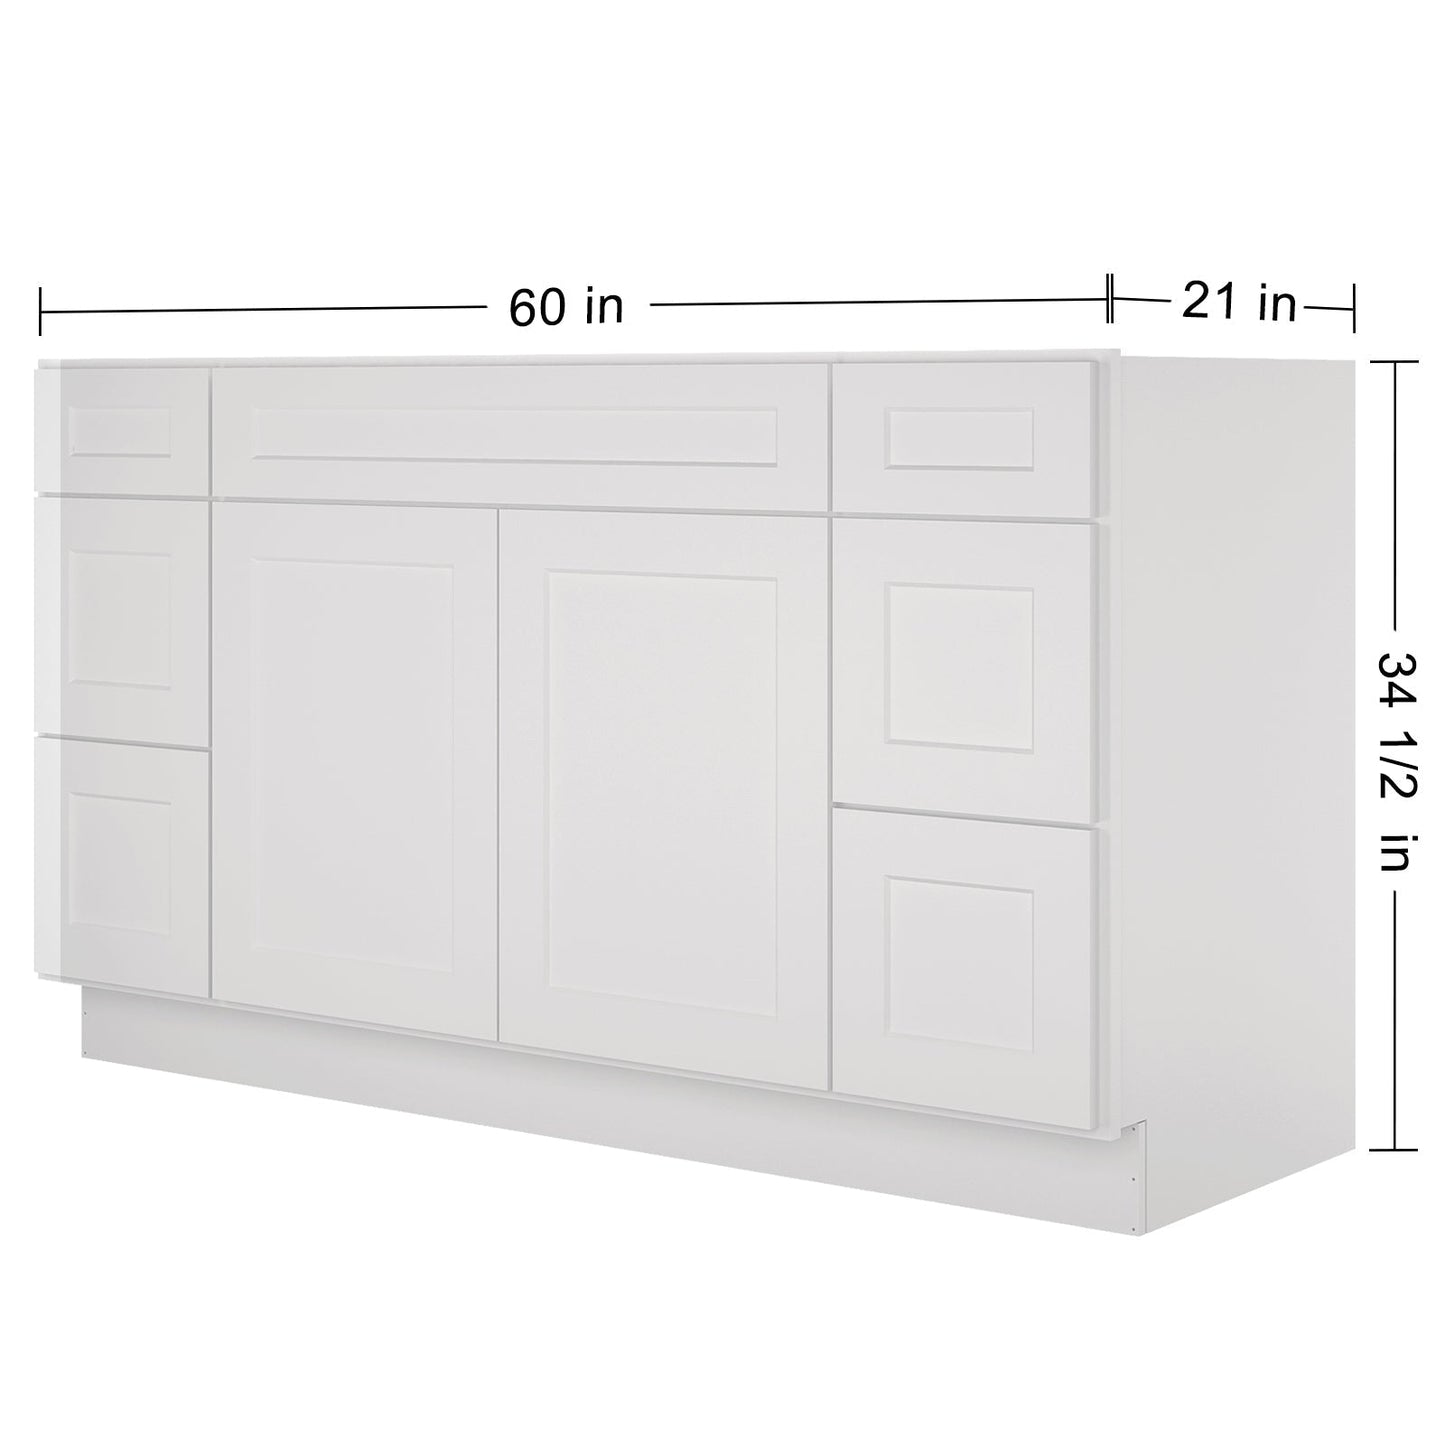 21"D Birch Solid Wood X48"W X 21"D X 34-1/2"H Bath Vanity Sink Drawer Cabinet without Top VDDB48